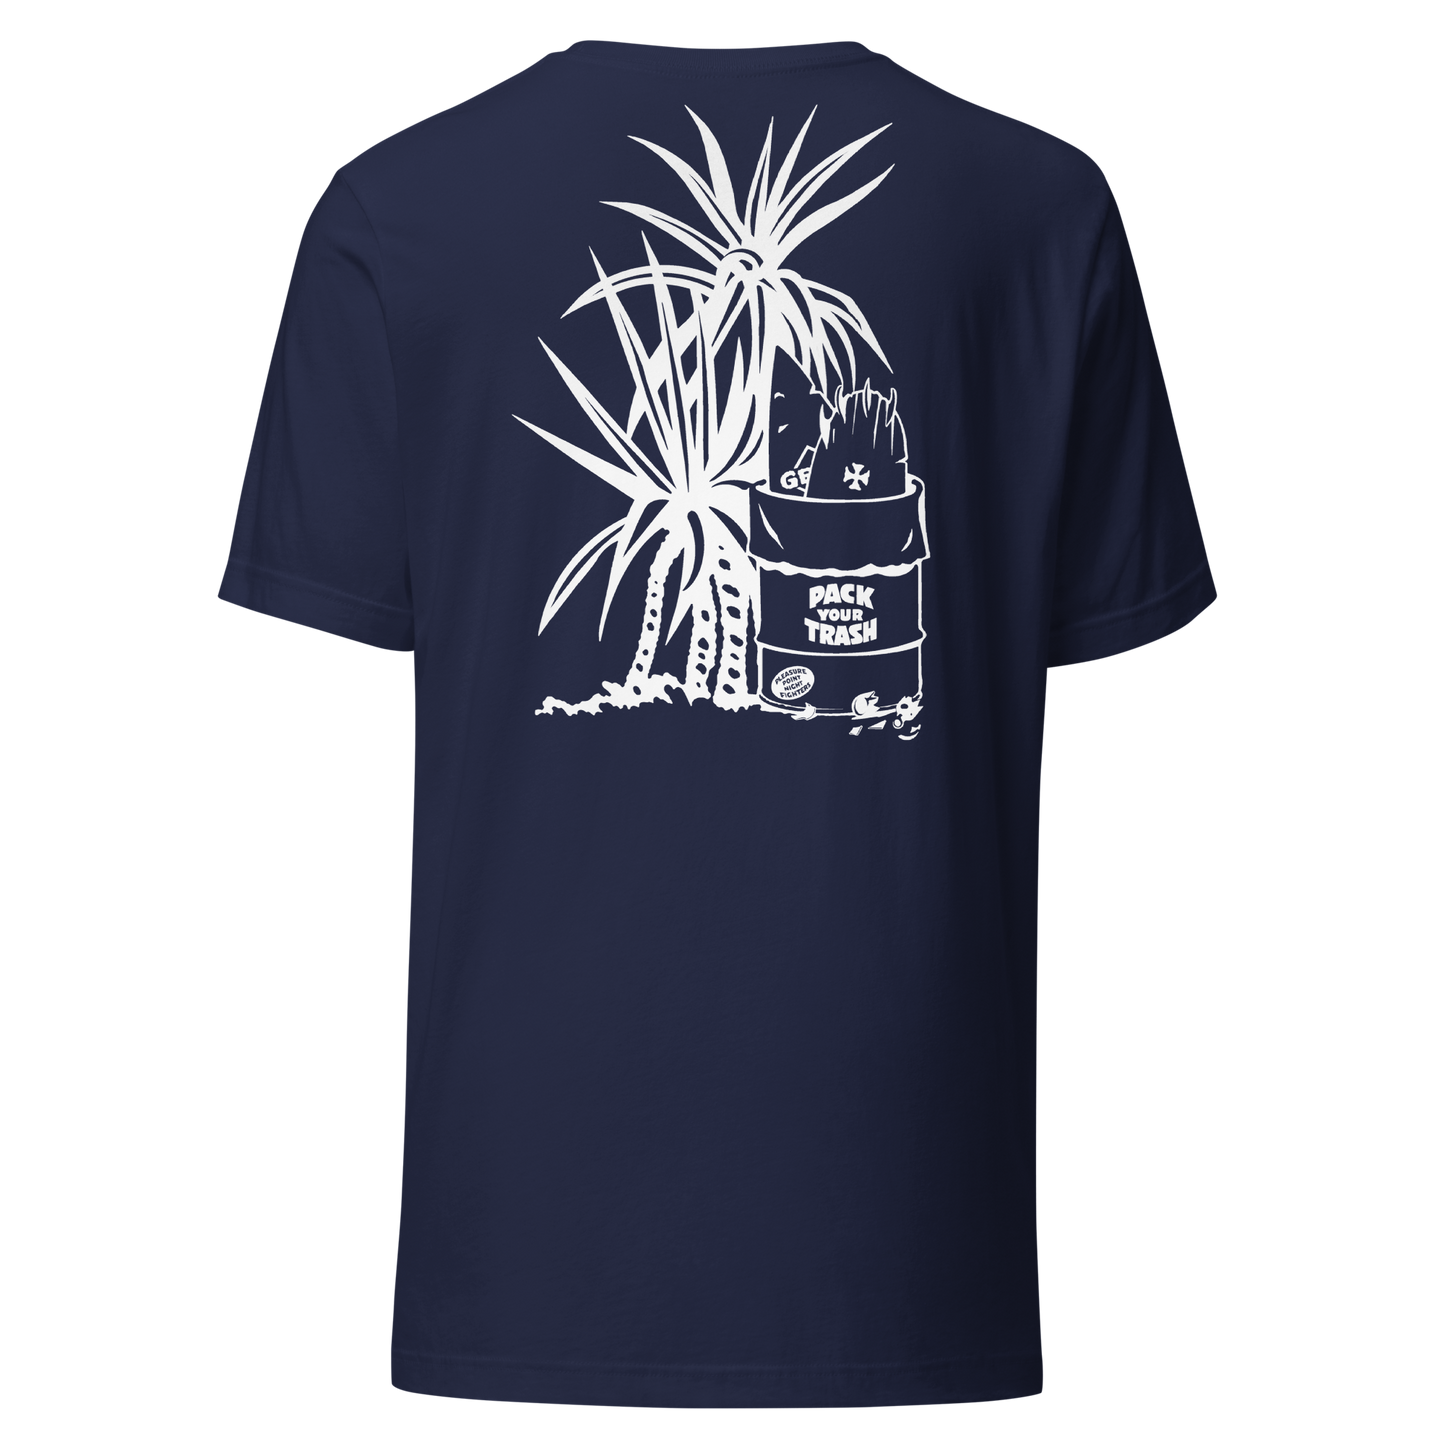 Pack Your Trash - Yucca + Can - White on Dark -Unisex t-shirt